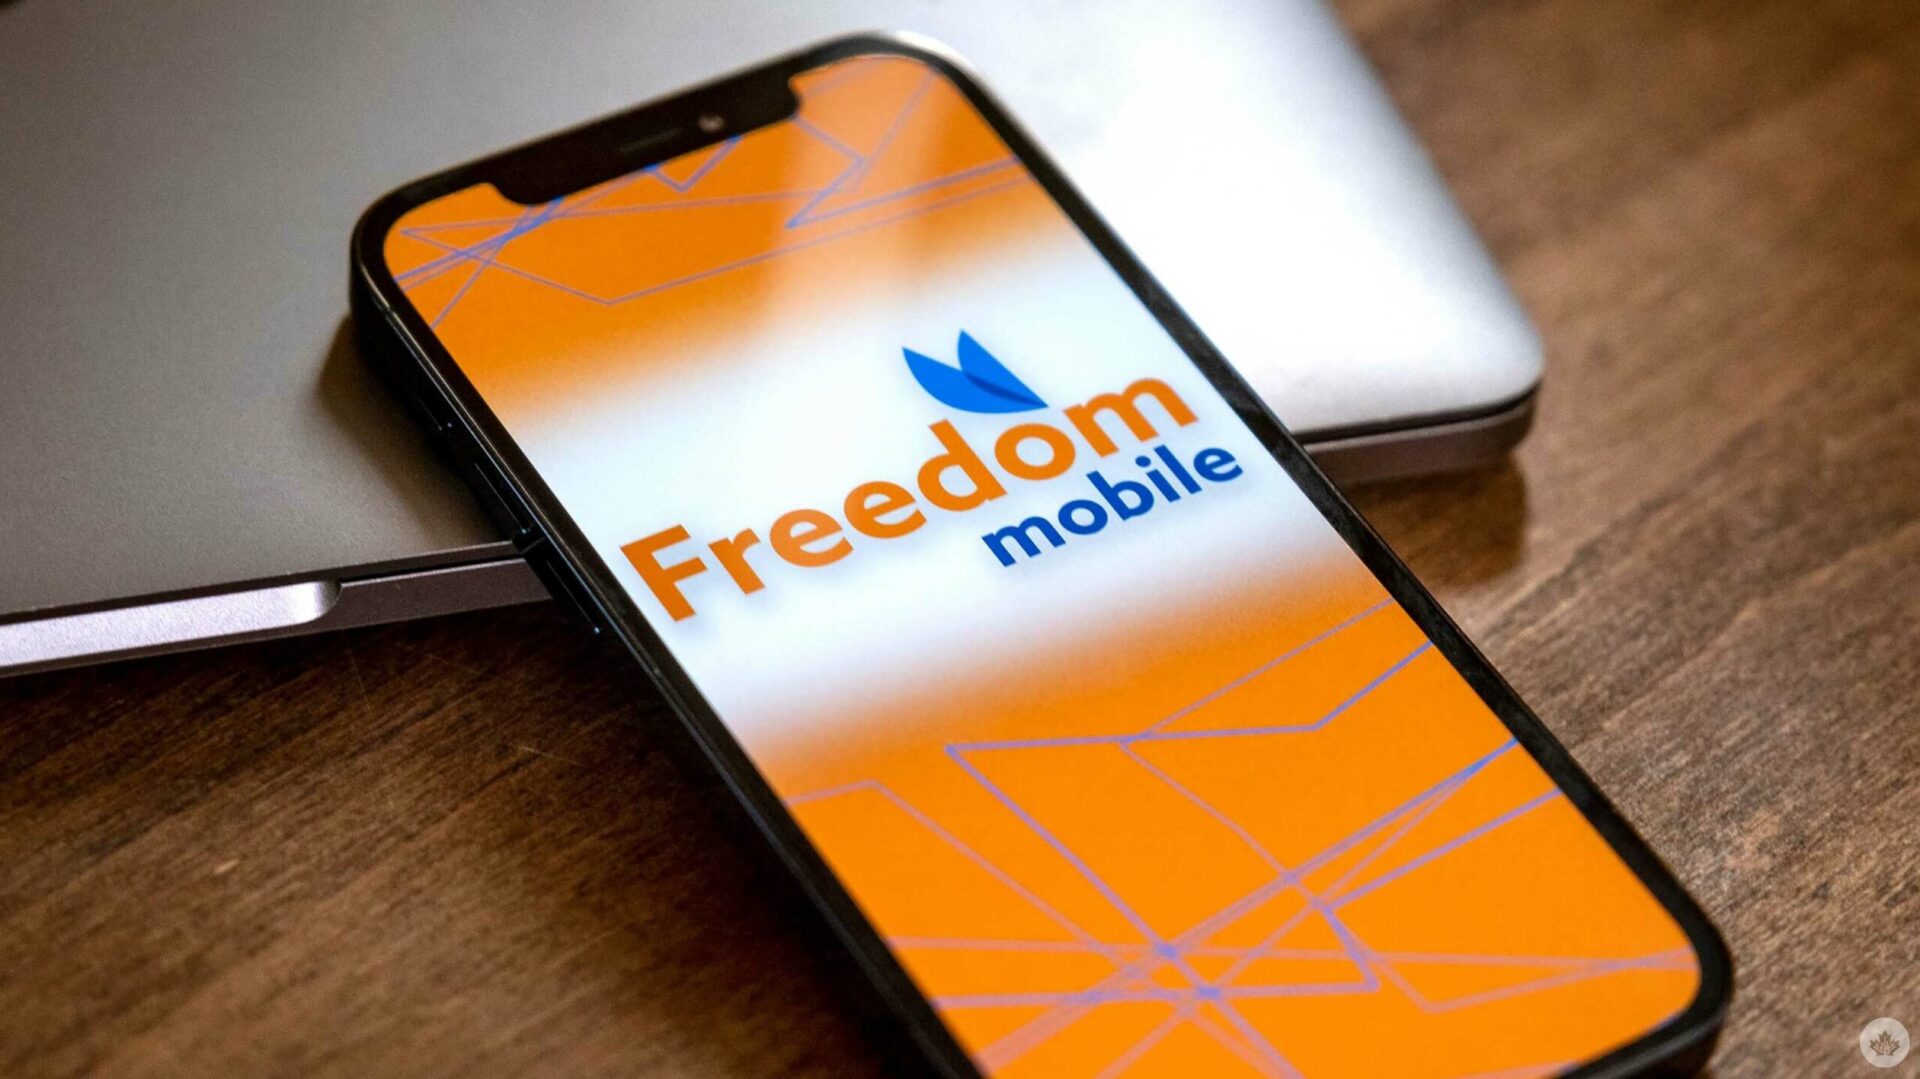 freedom mobile